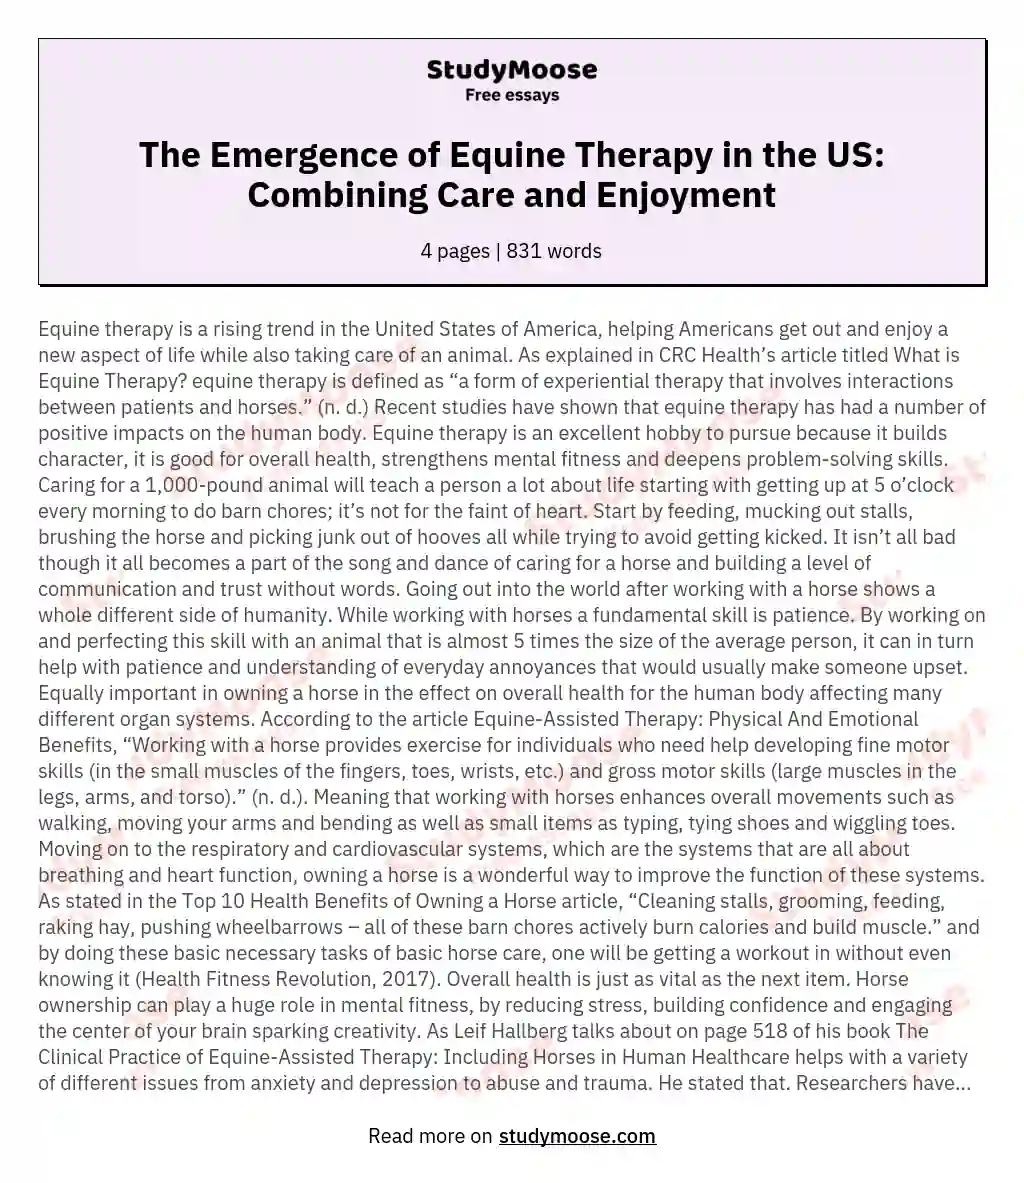 The Emergence of Equine Therapy in the US: Combining Care and Enjoyment essay